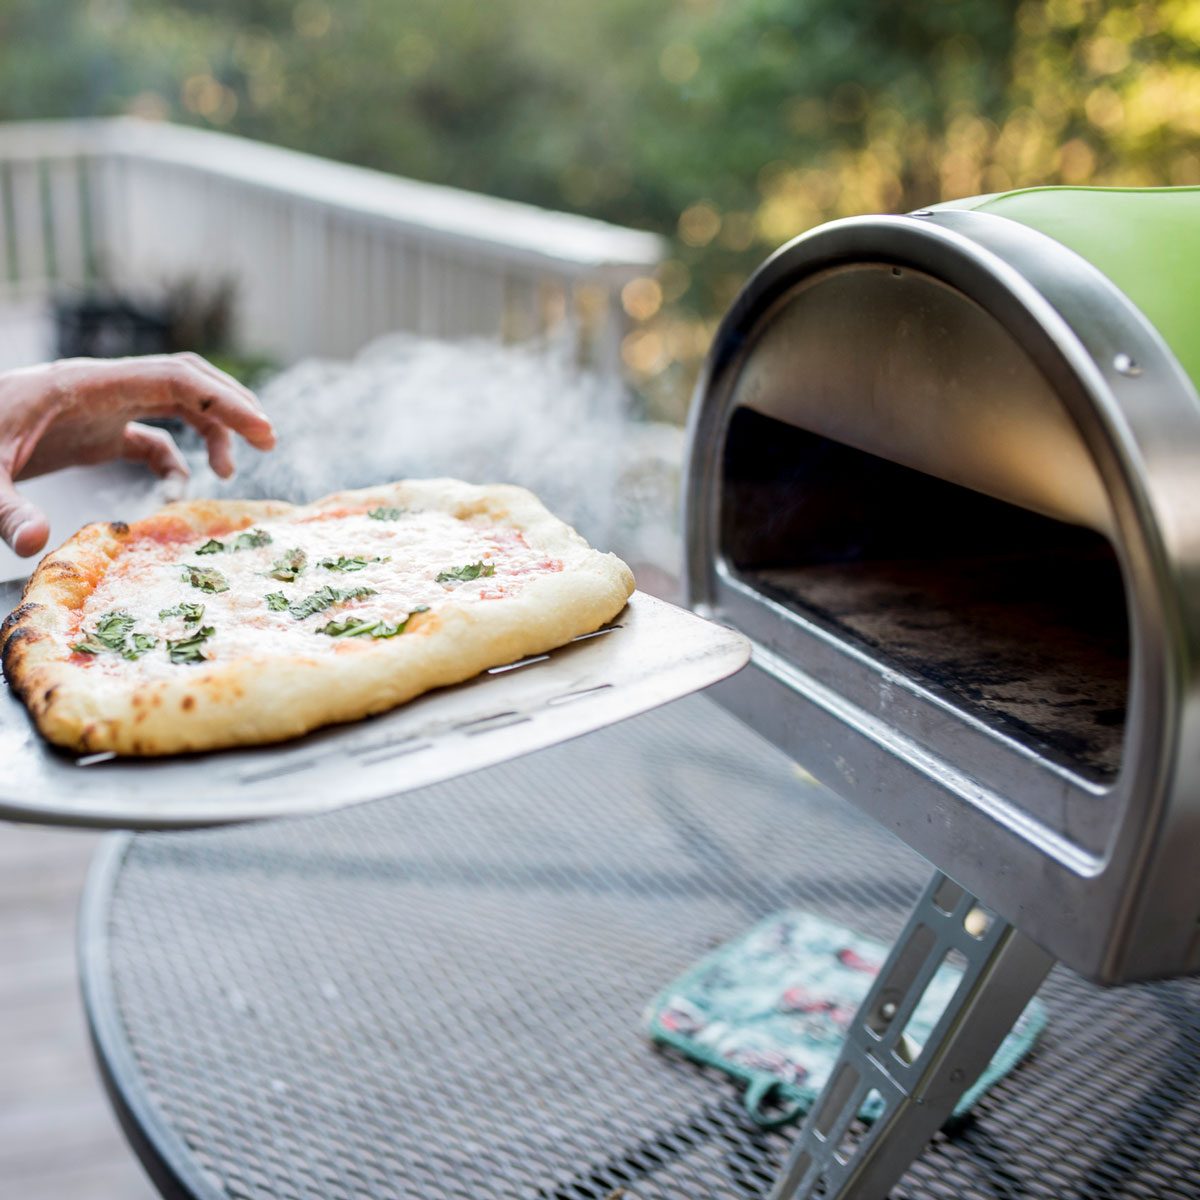 tackle Mundtlig Par 11 Best Pizza Oven Tools and Accessories | The Family Handyman